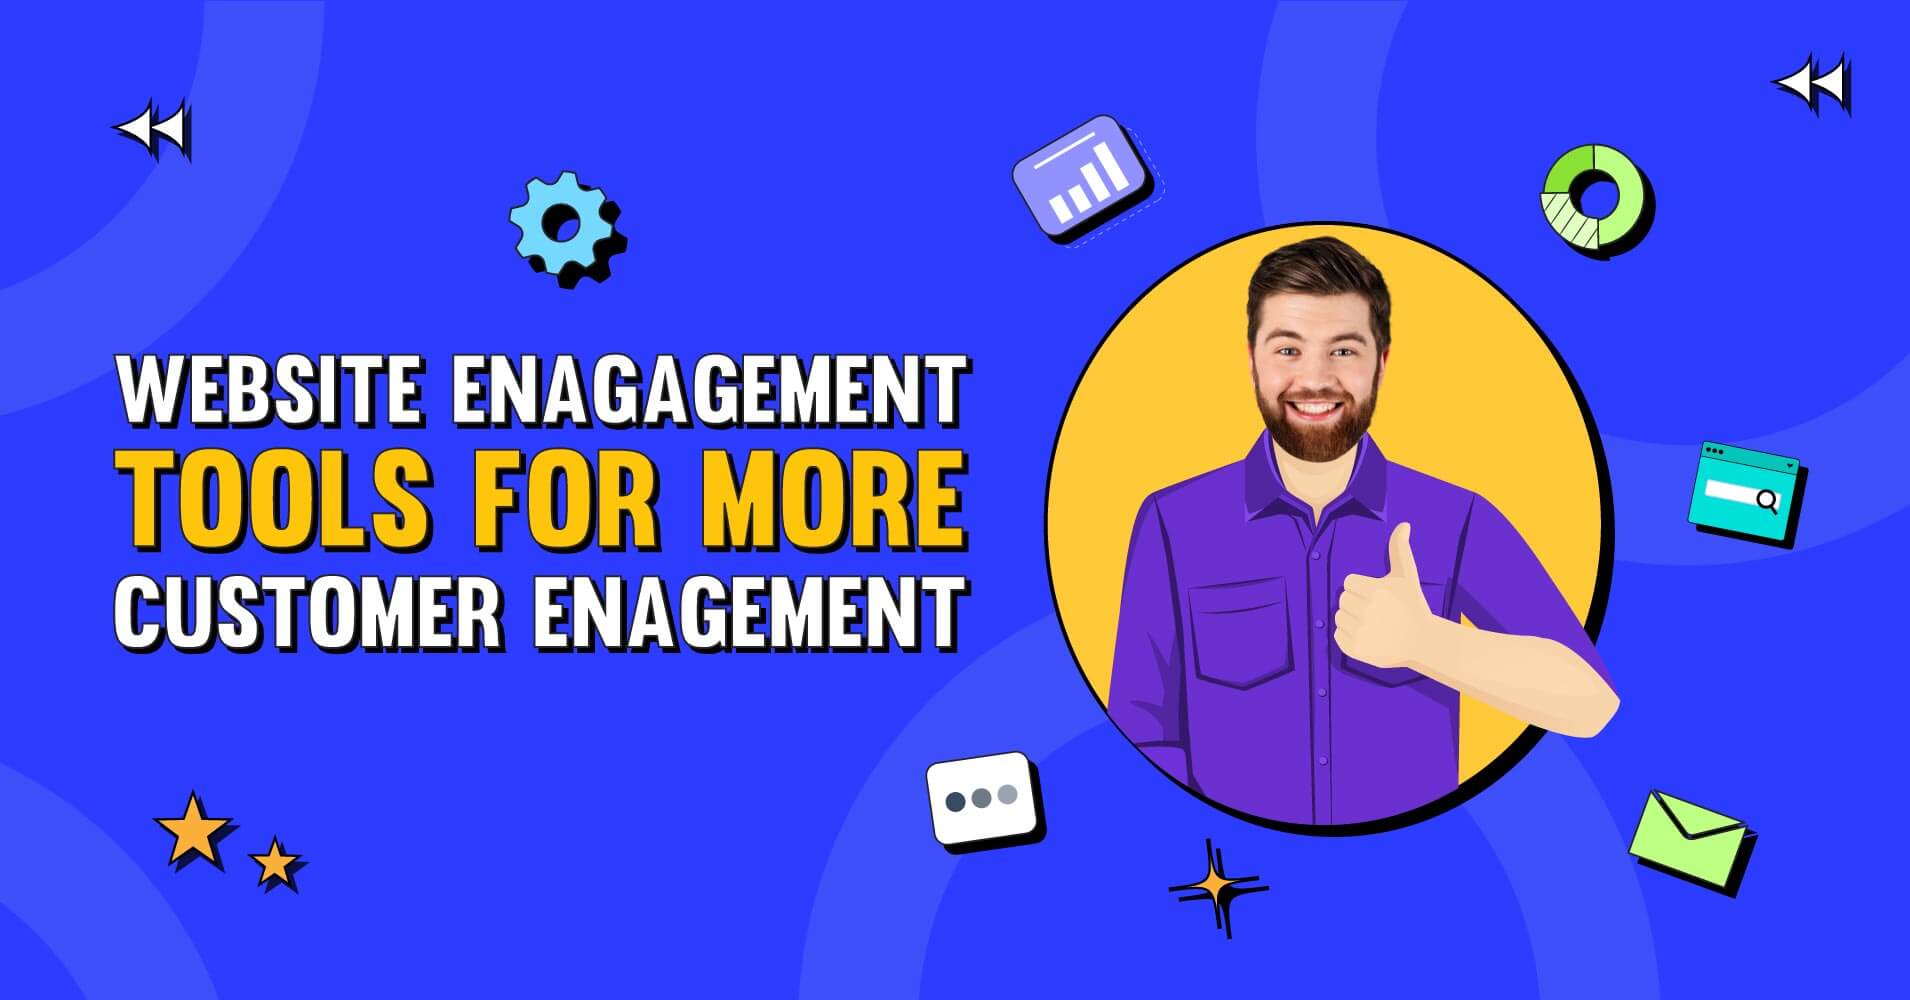 20+ Website Engagement Tools for More Customer Engagement